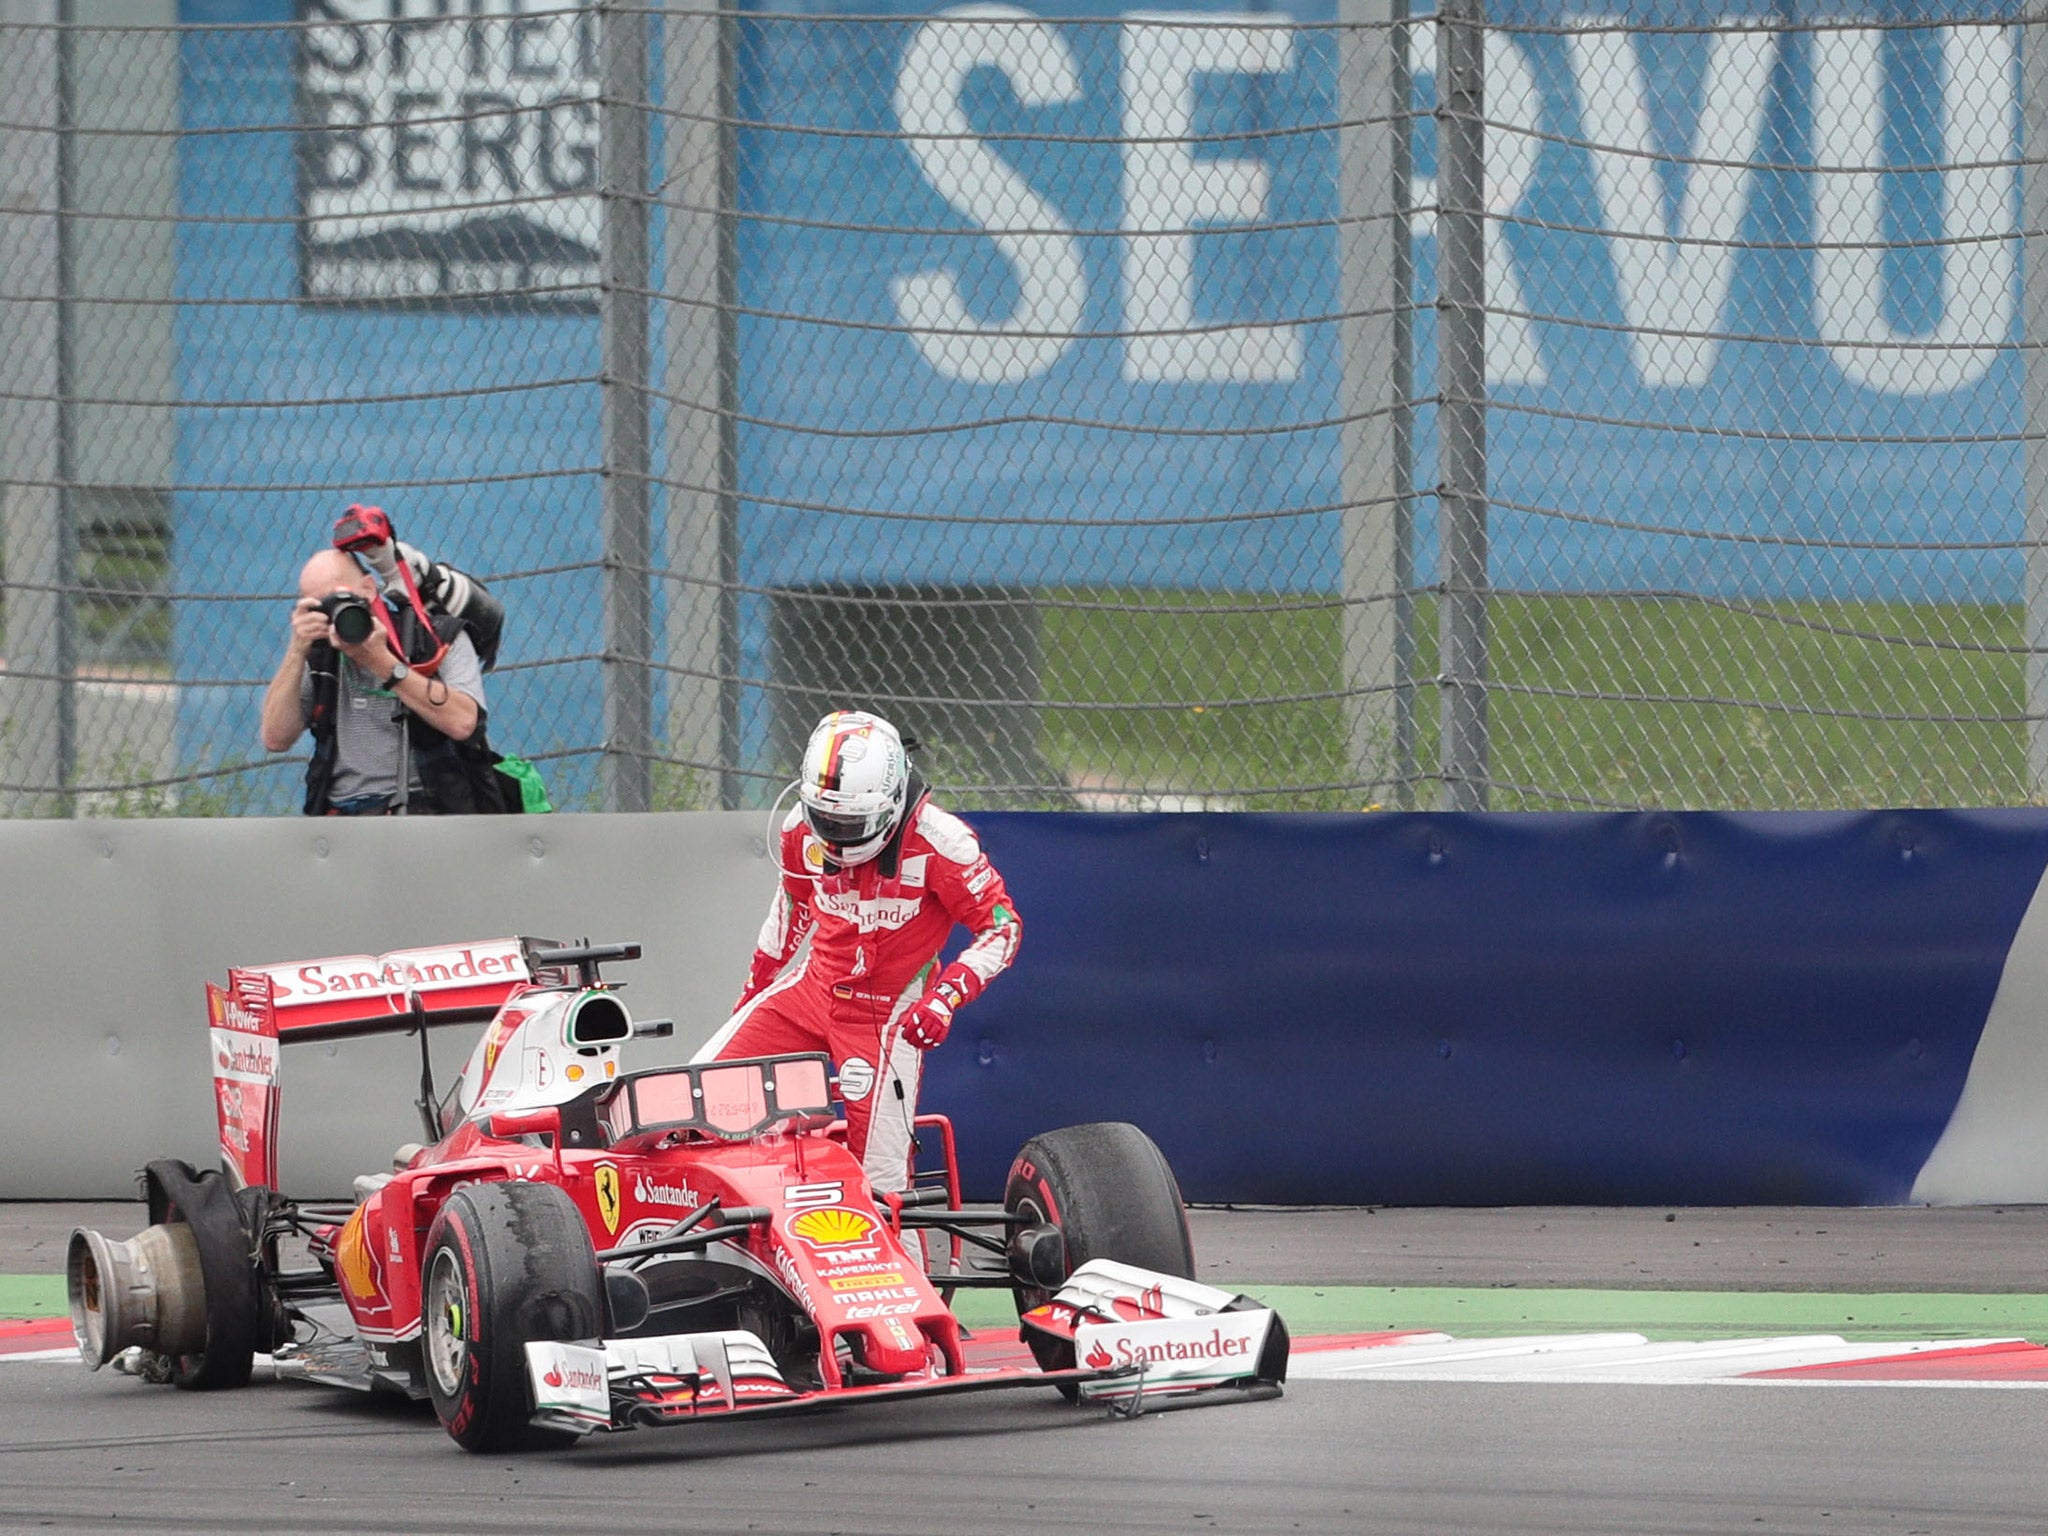 Sebastian Vettel gets out of his stranded Ferrari after crashing out of the Austrian Grand Prix